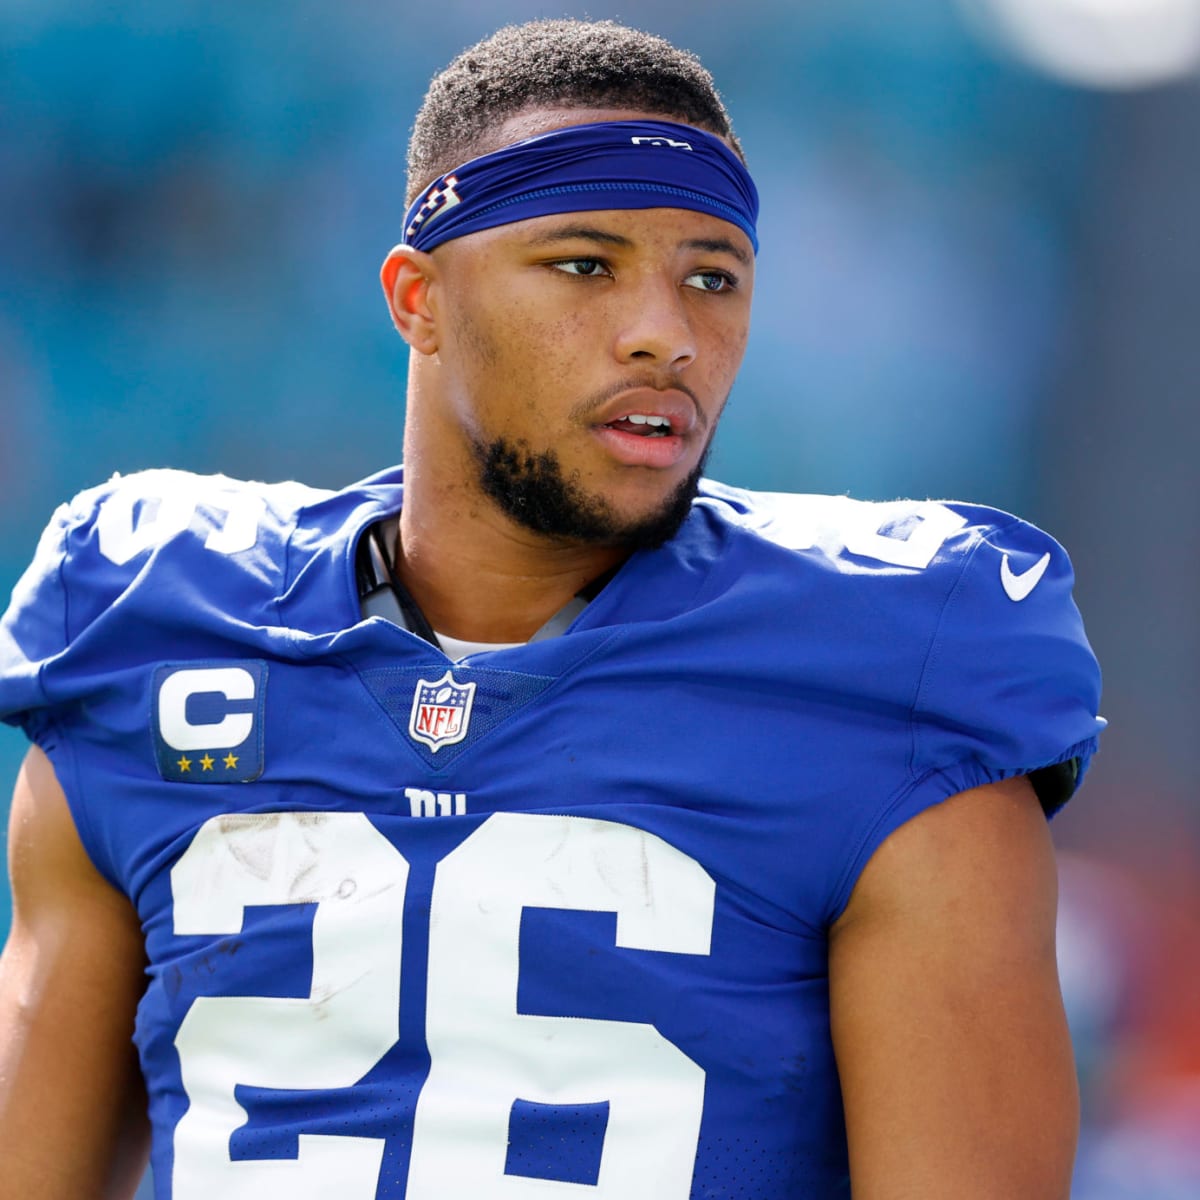 Saquon Barkley says he isnt disappointed despite rough year  Big Blue View